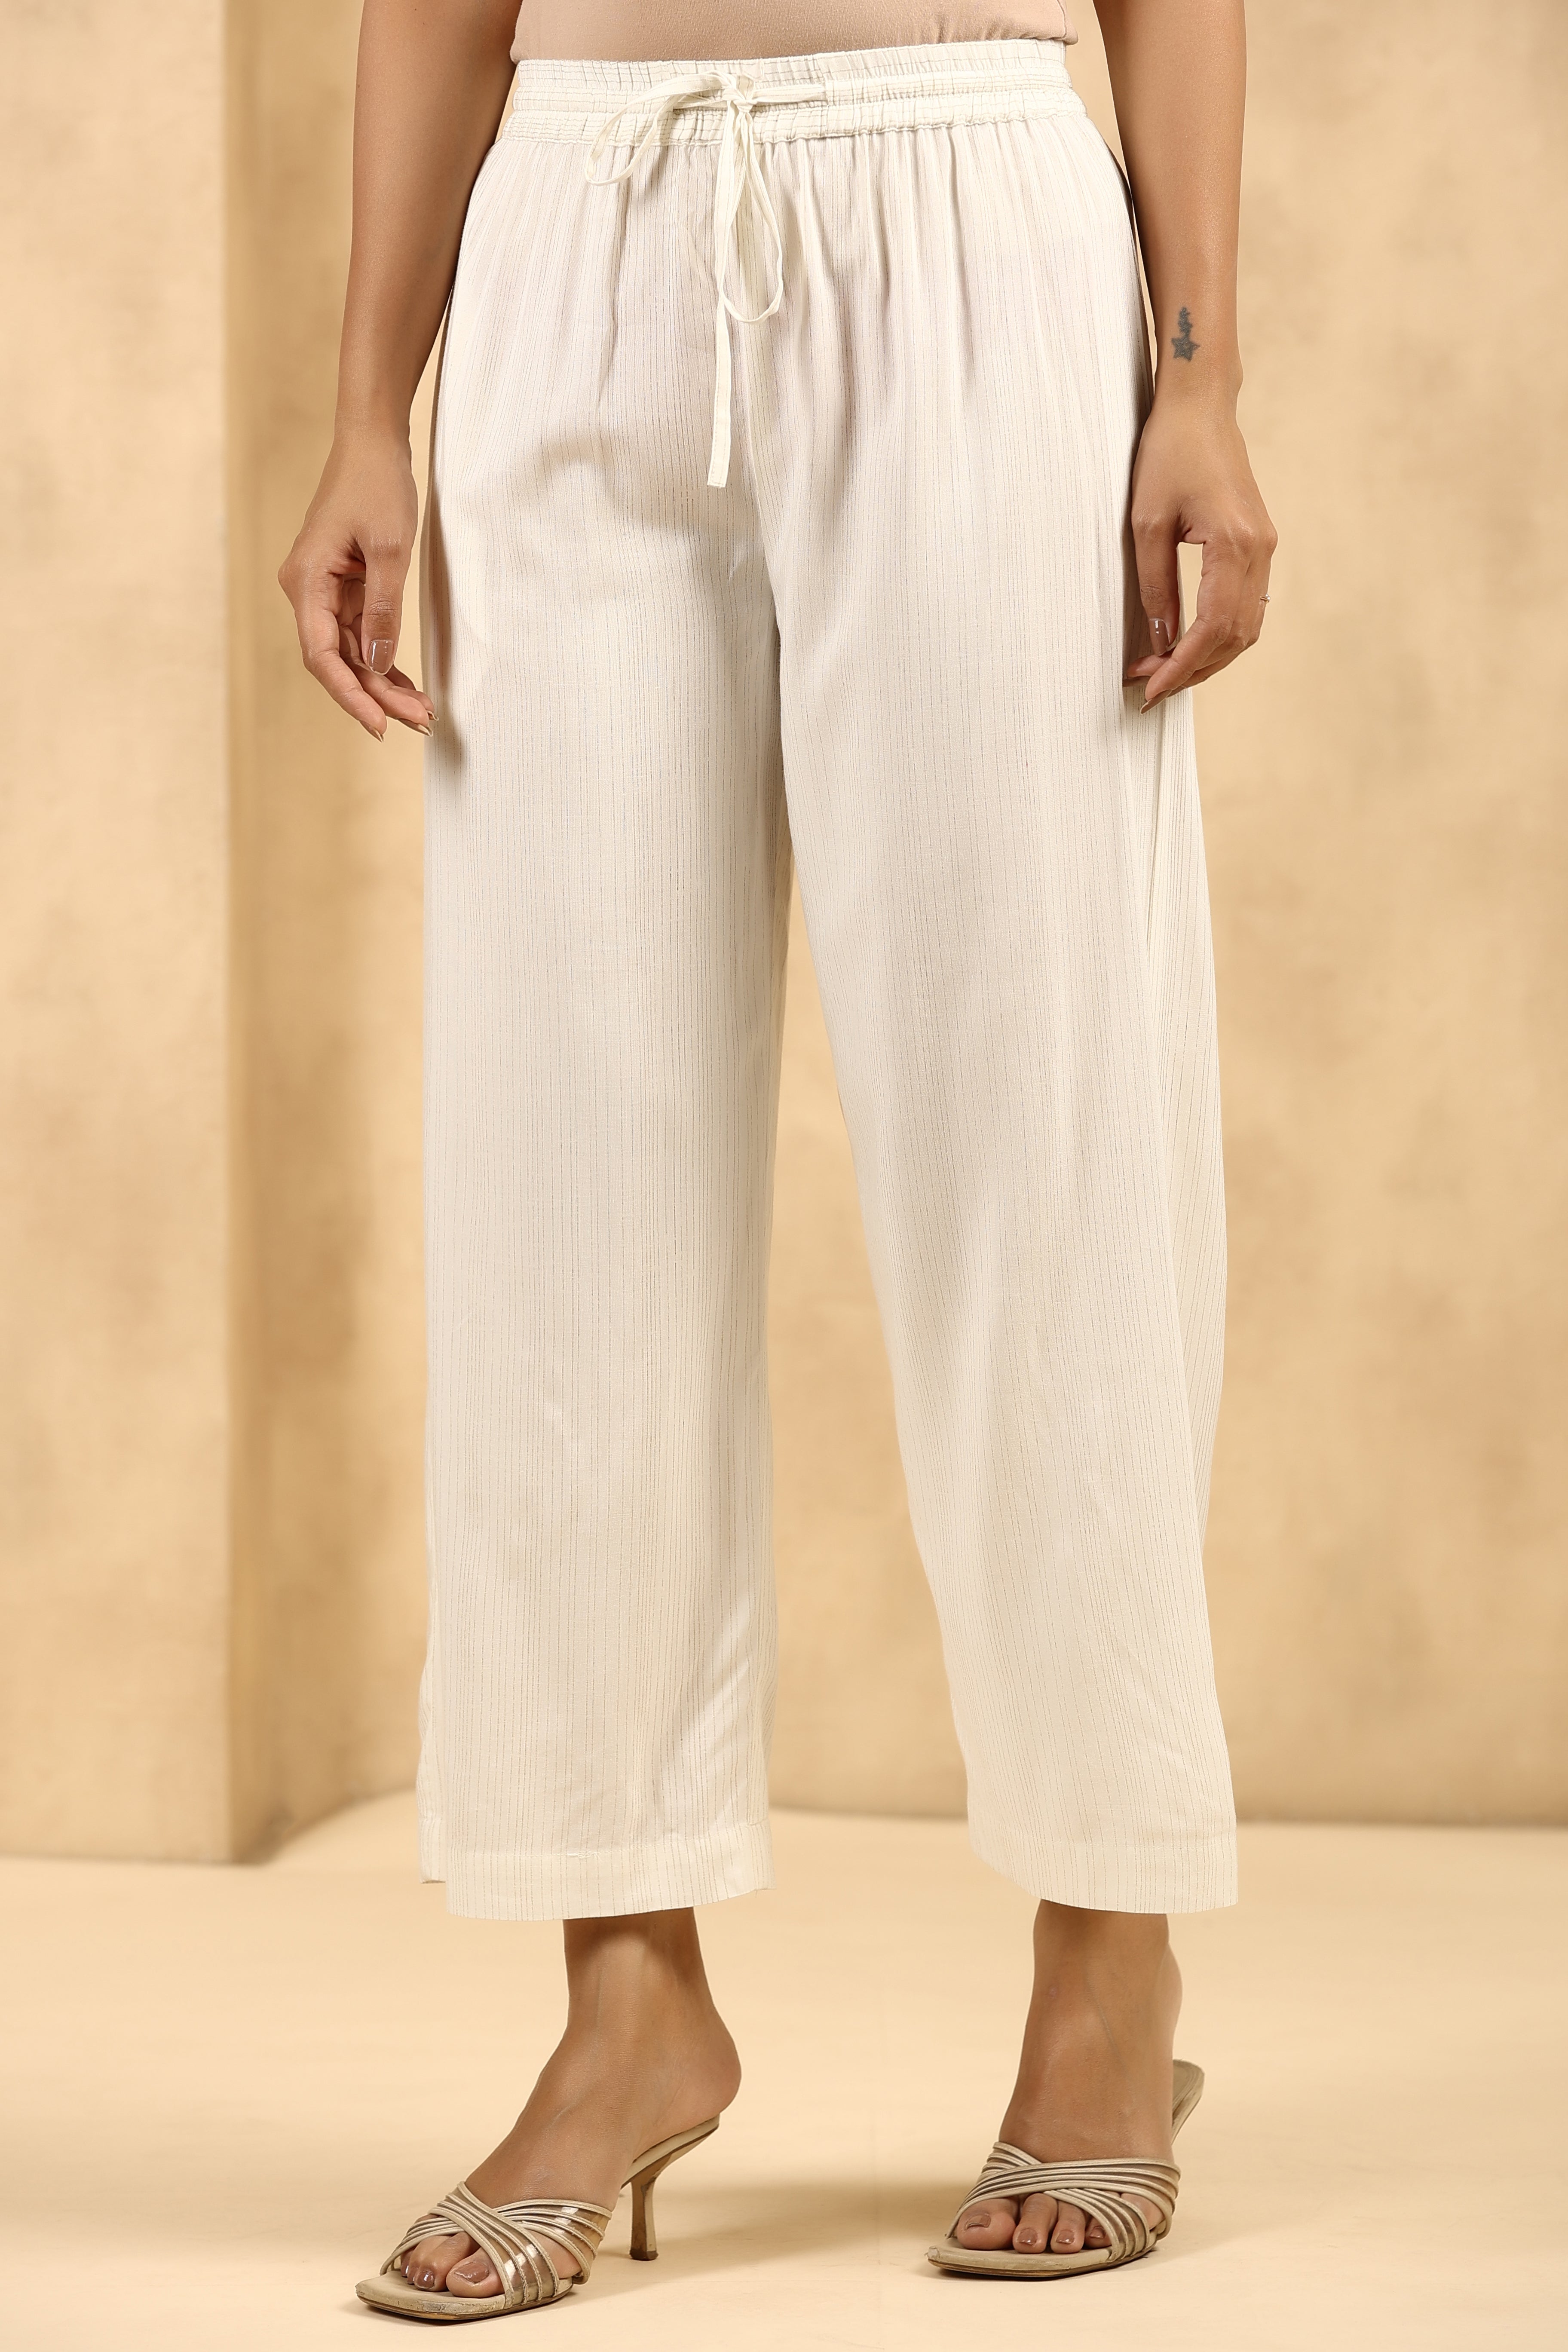 Buy Off White Pleated Flared Palazzo Online - RK India Store View